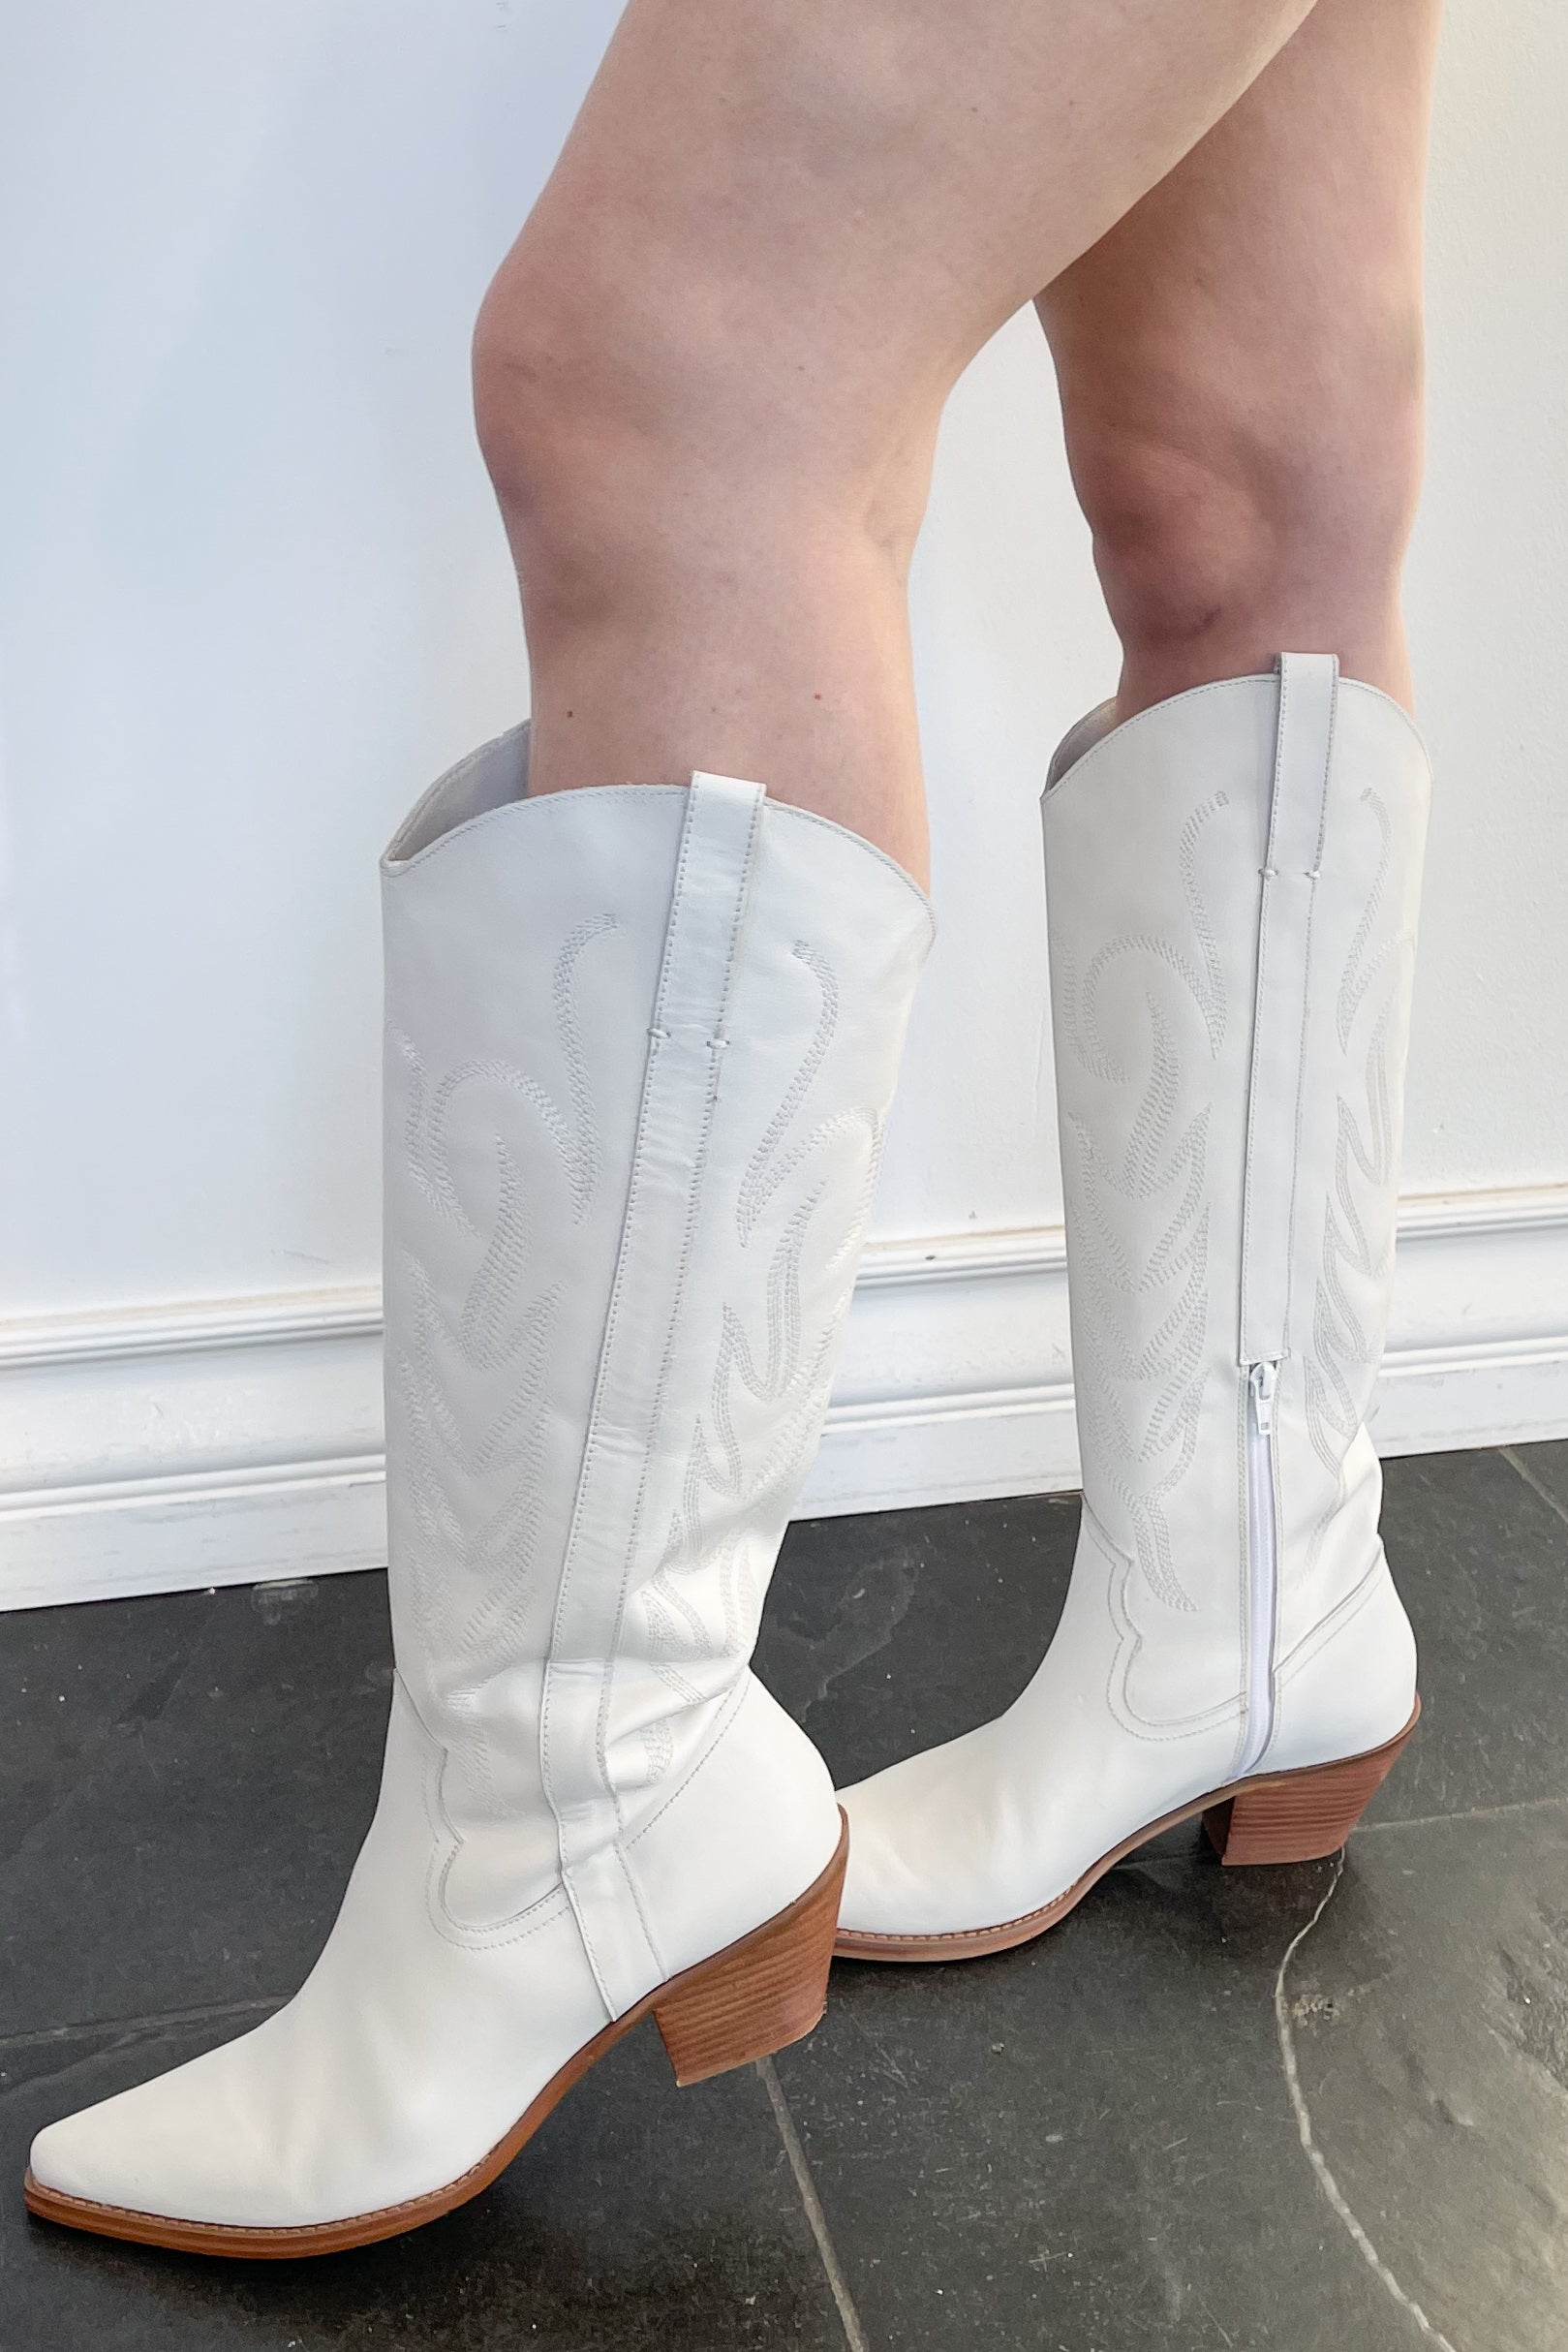 Matisse Agency Western Boot-White